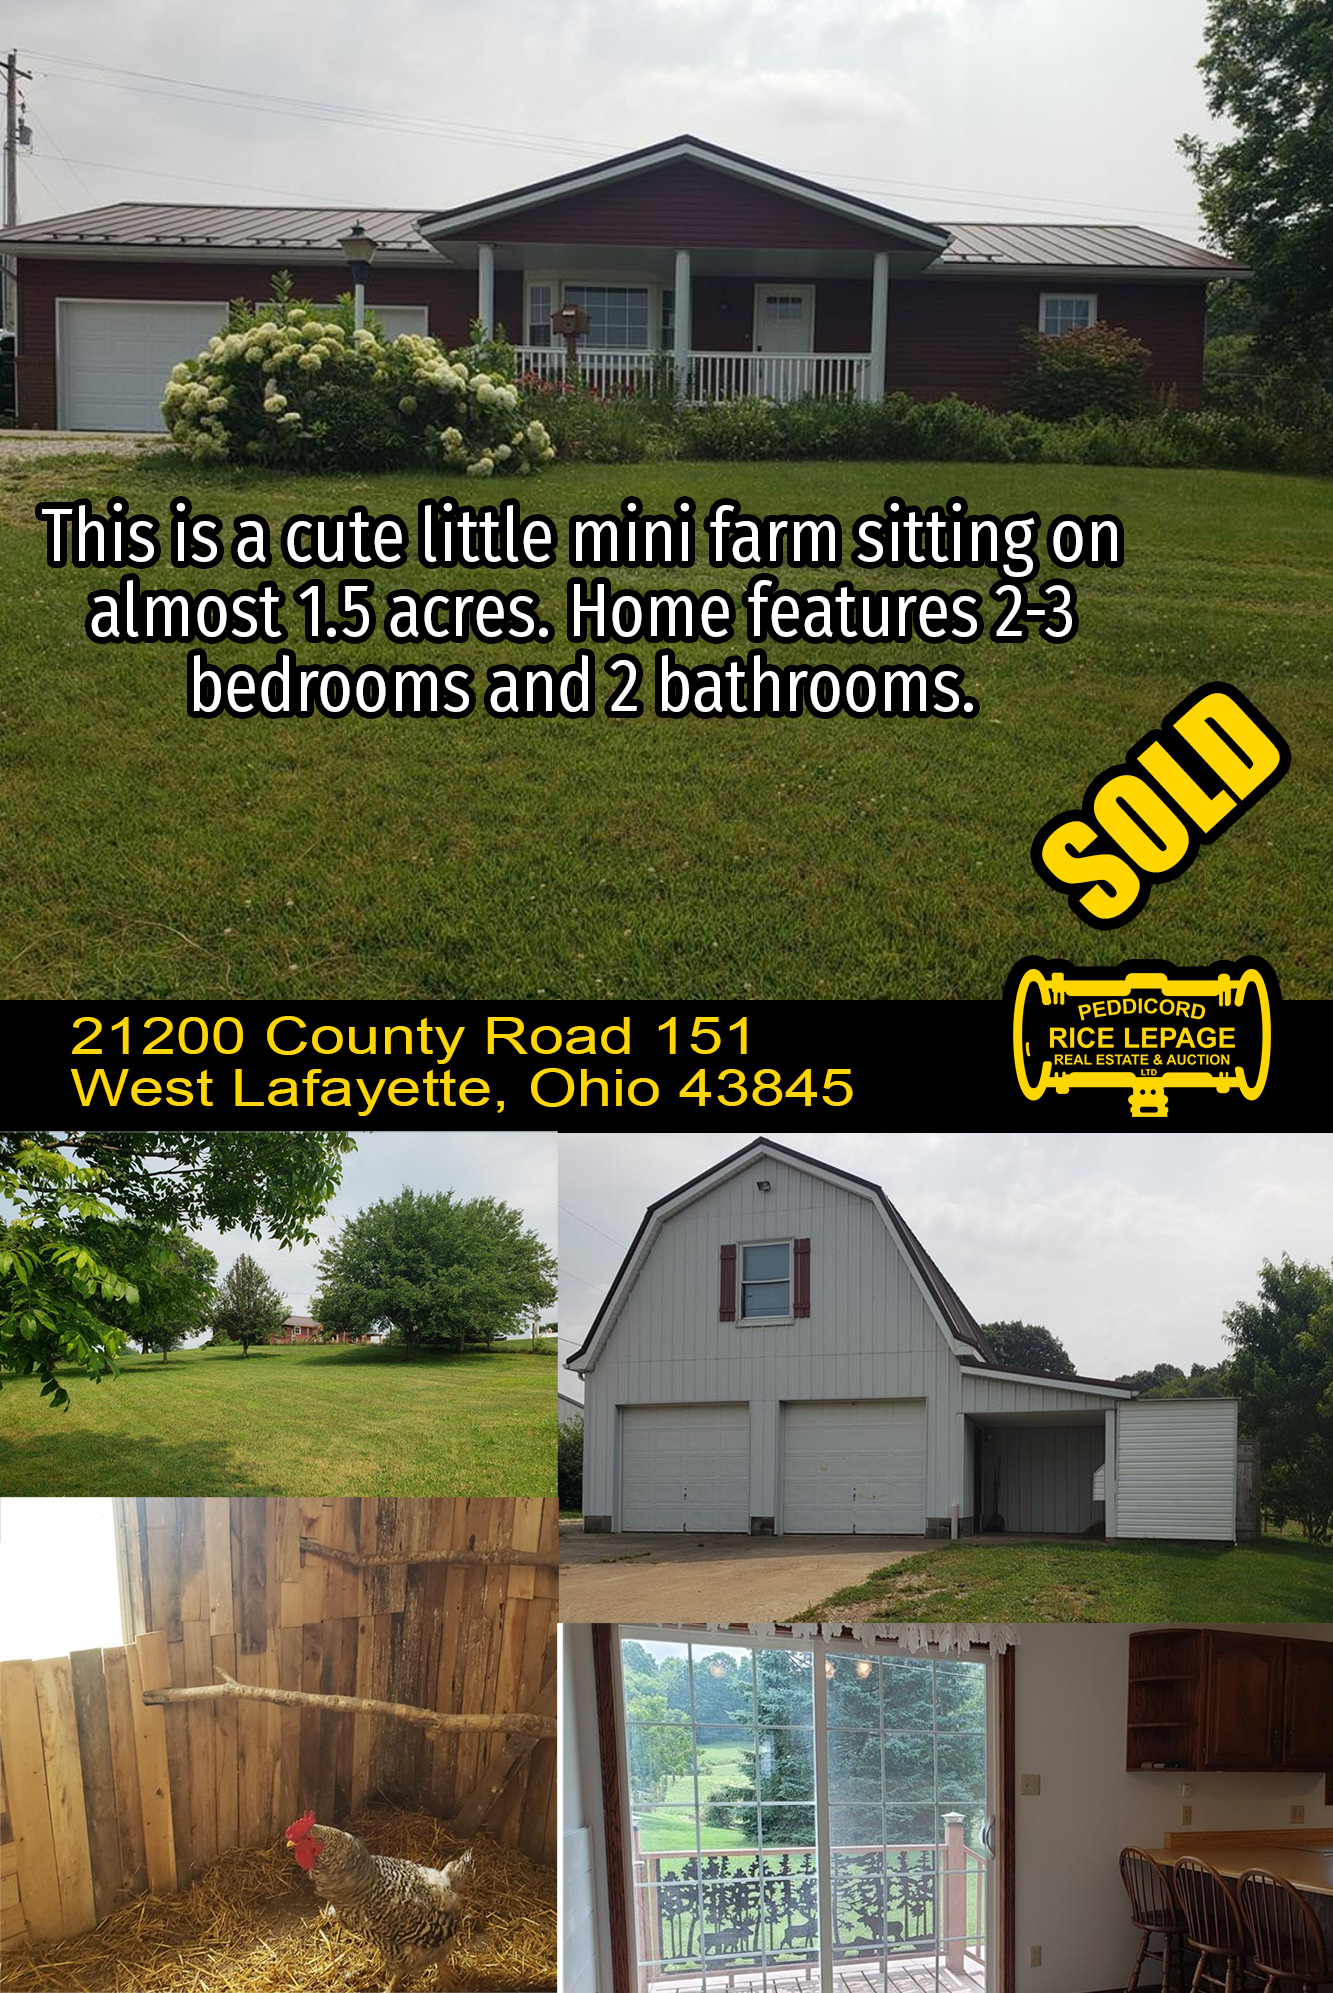 21200 County Road 151, West Lafayette, OH 43845  Ad Listing: 4475210